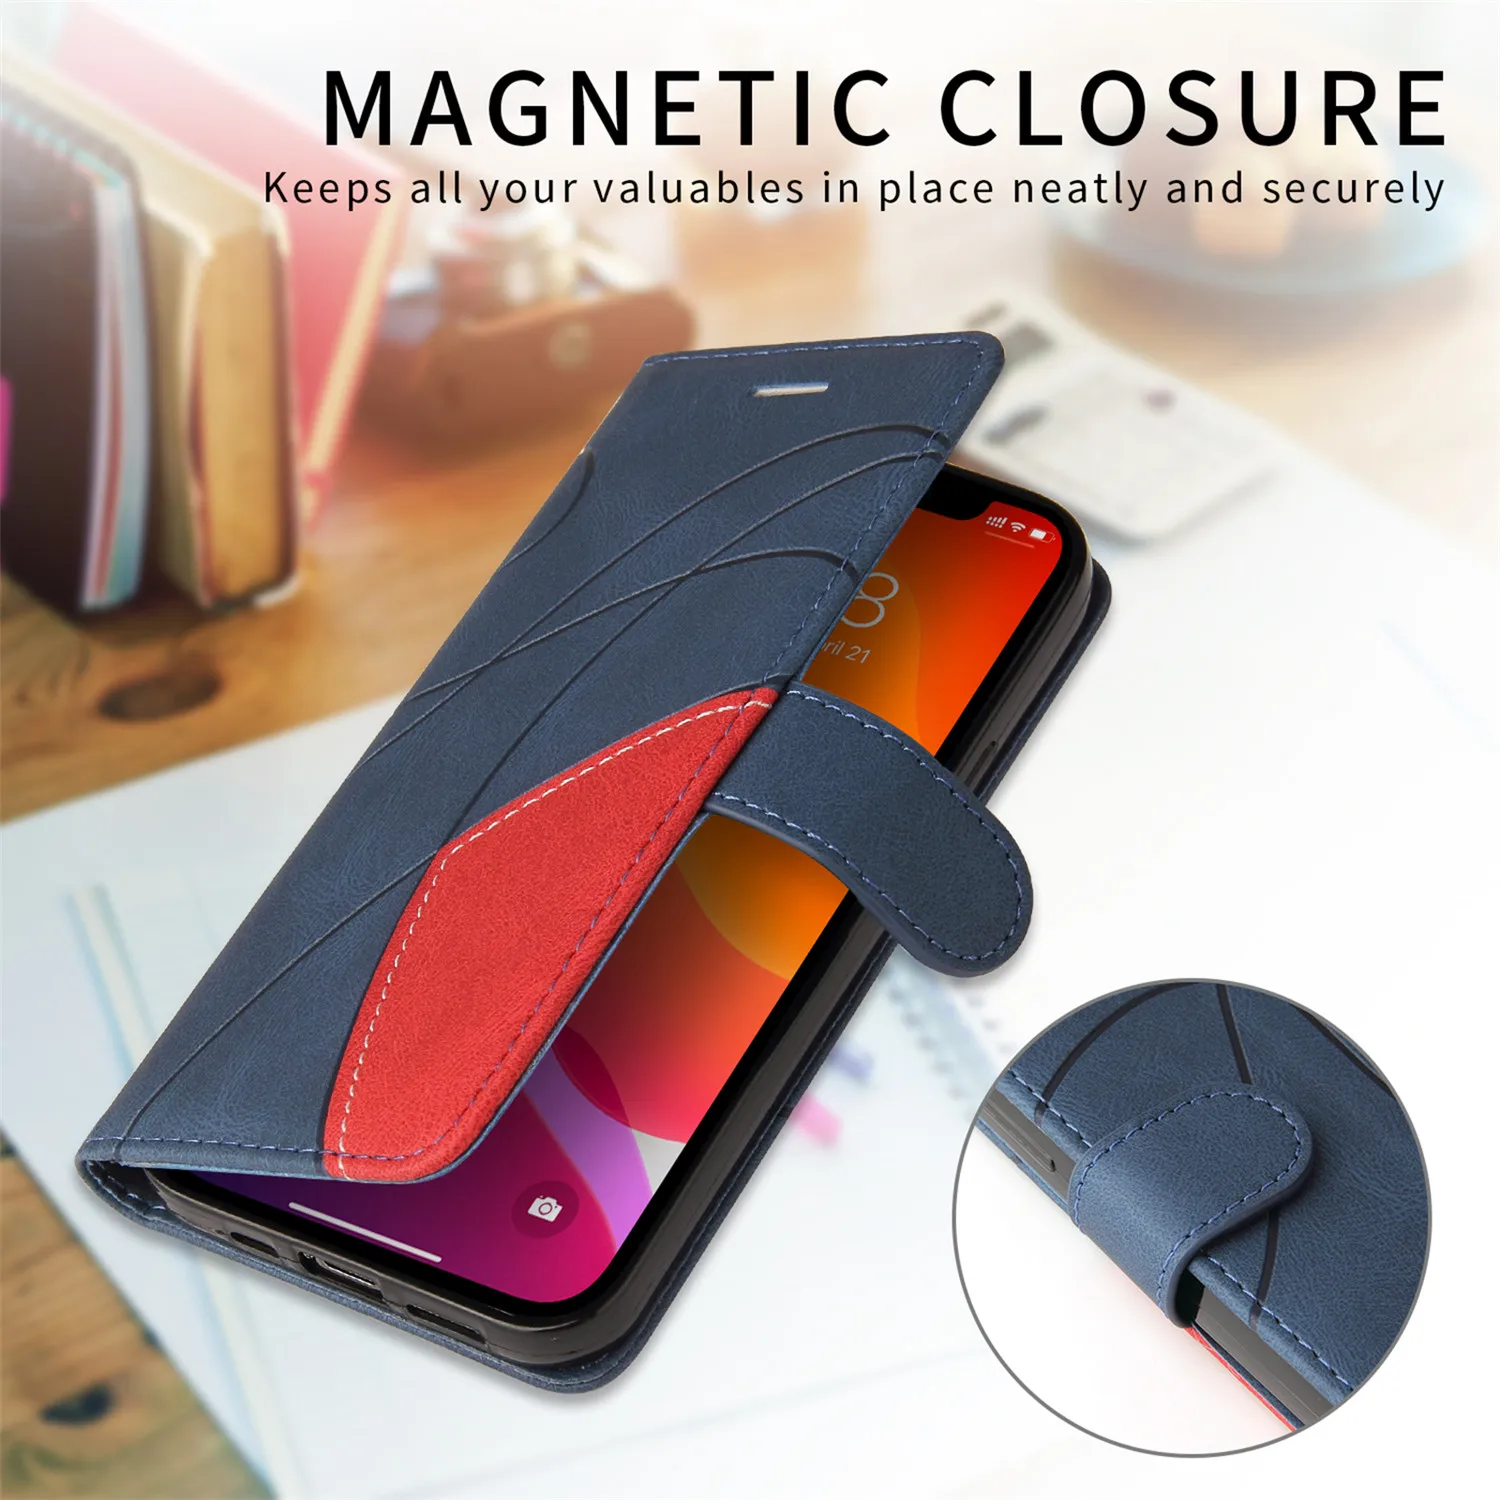 Leather Wallet Phone Case For iPhone 5 5S SE 2020 6 6S 7 8 Plus 13 Mini 11 12 Pro XS Max XR Magnetic Flip Stand Bags Cover Coque cute iphone 12 pro max cases